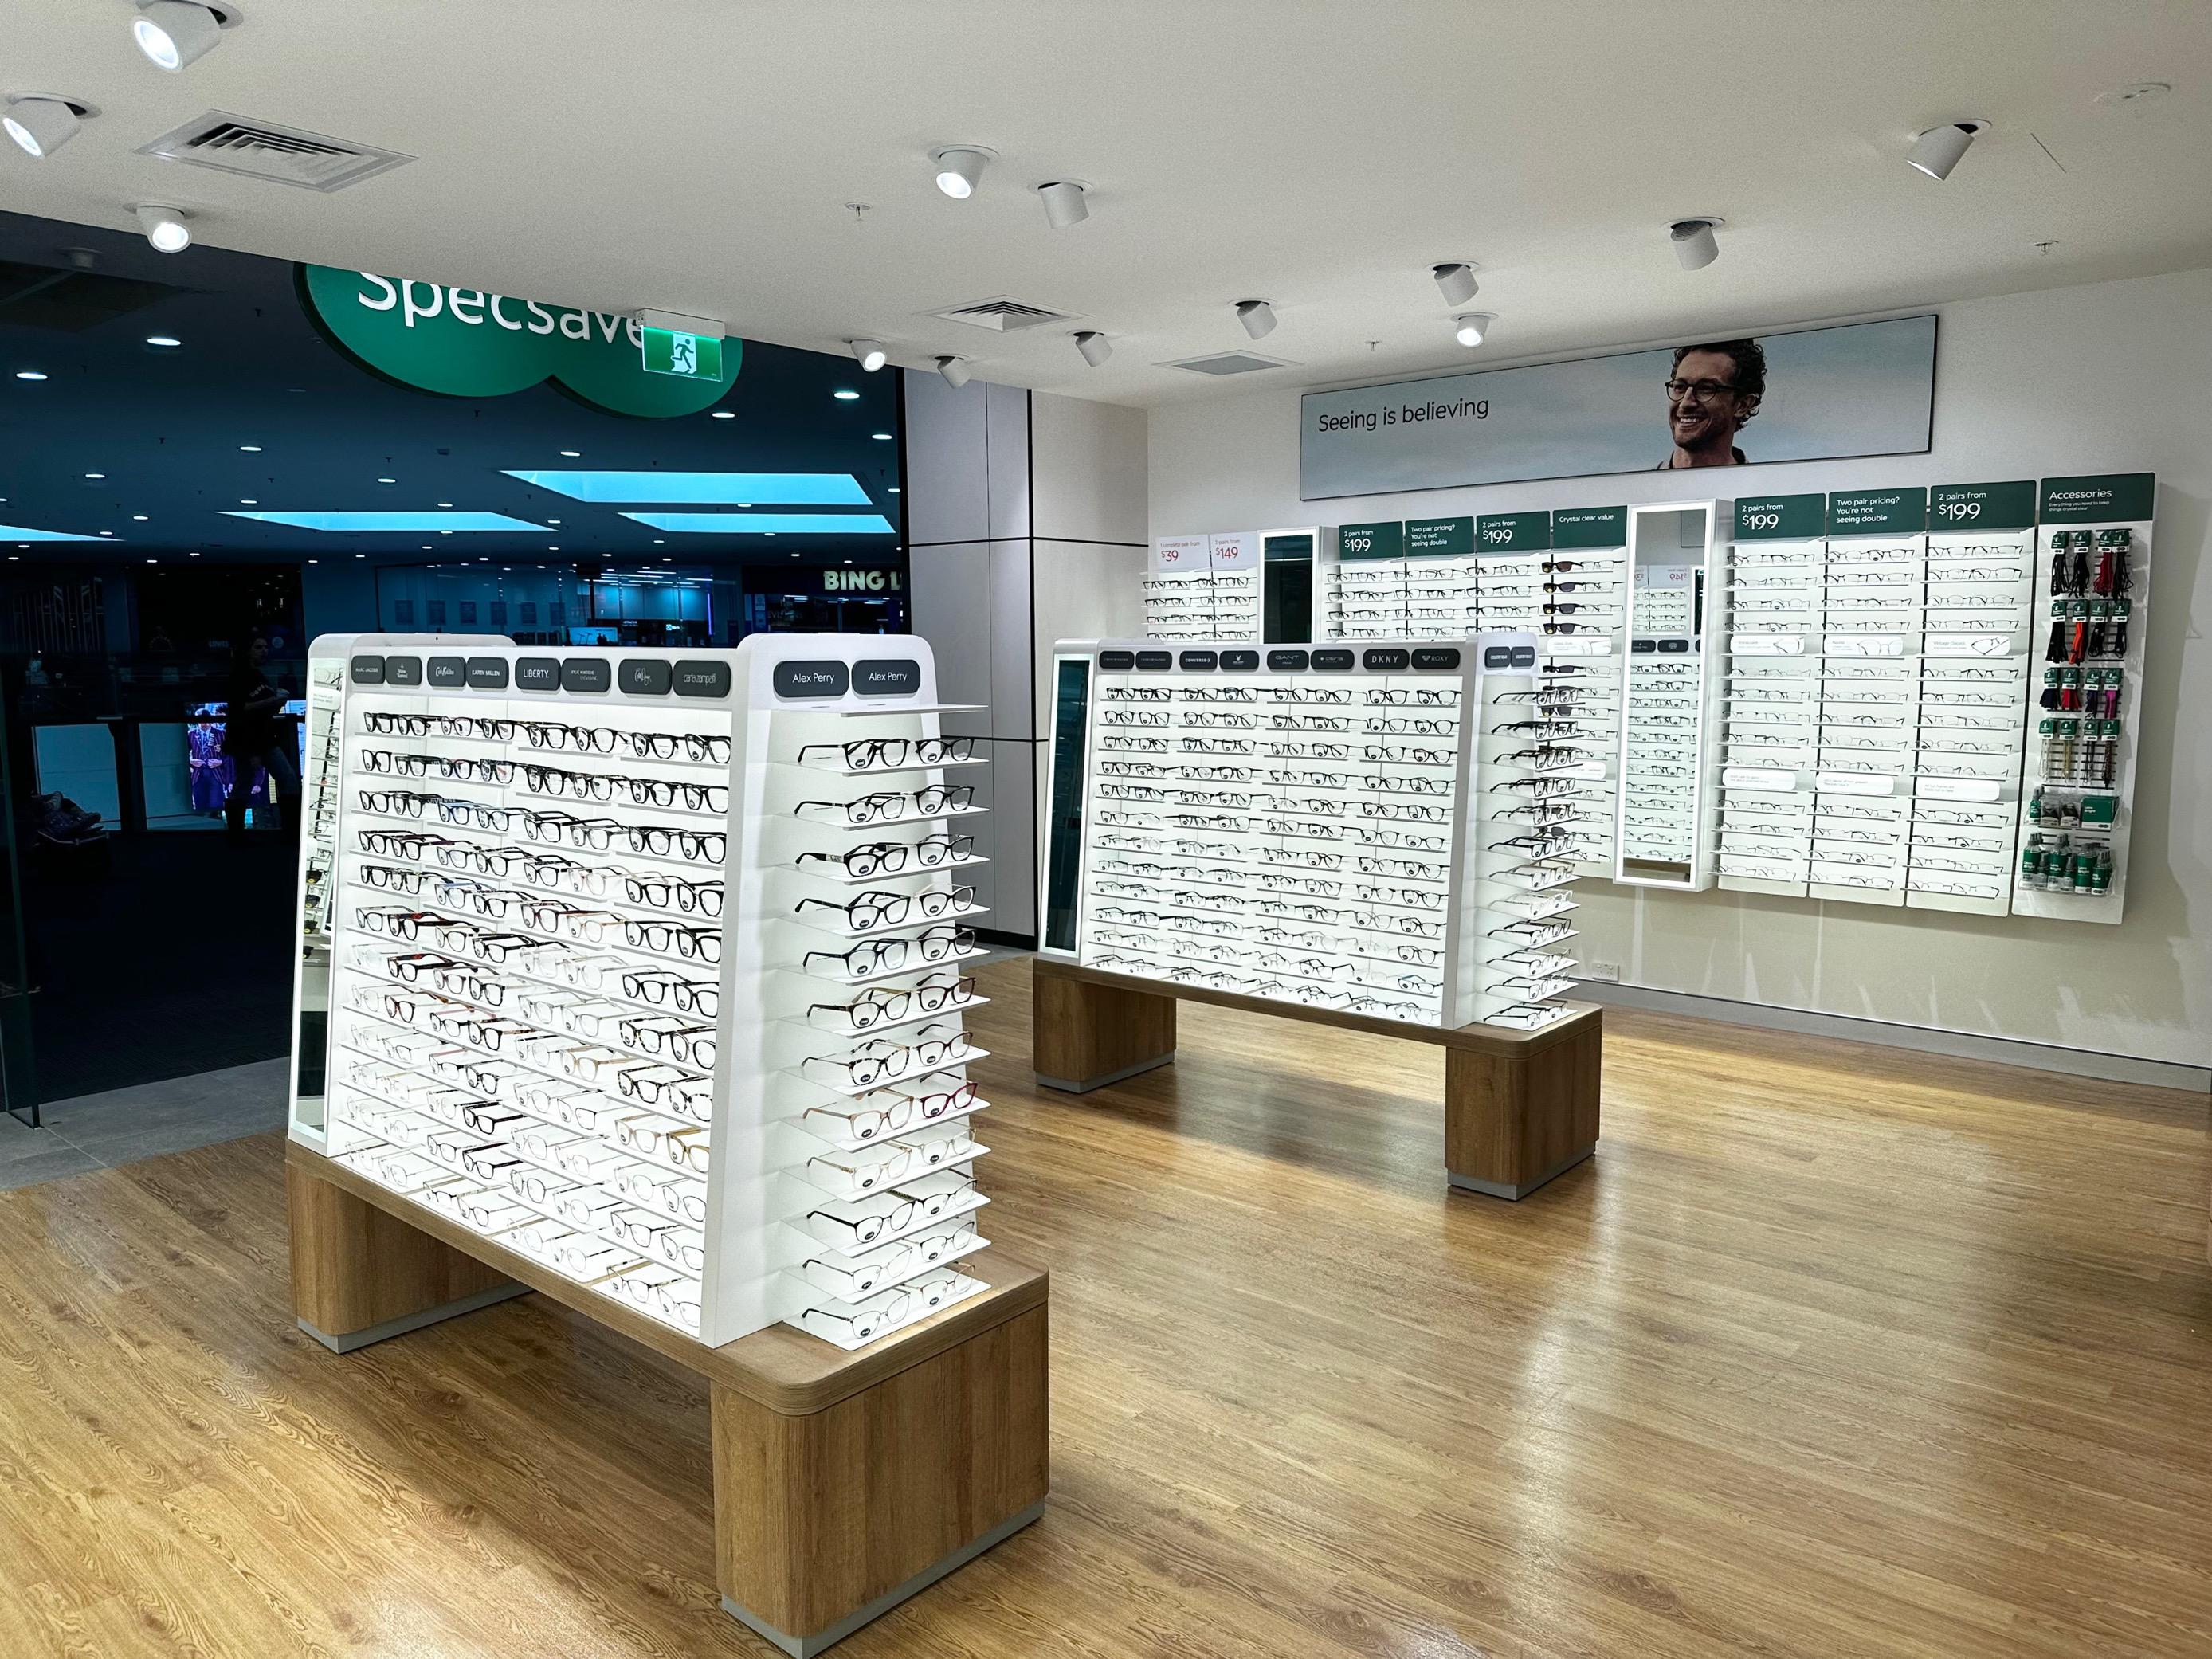 Images Specsavers Optometrists - Carlingford